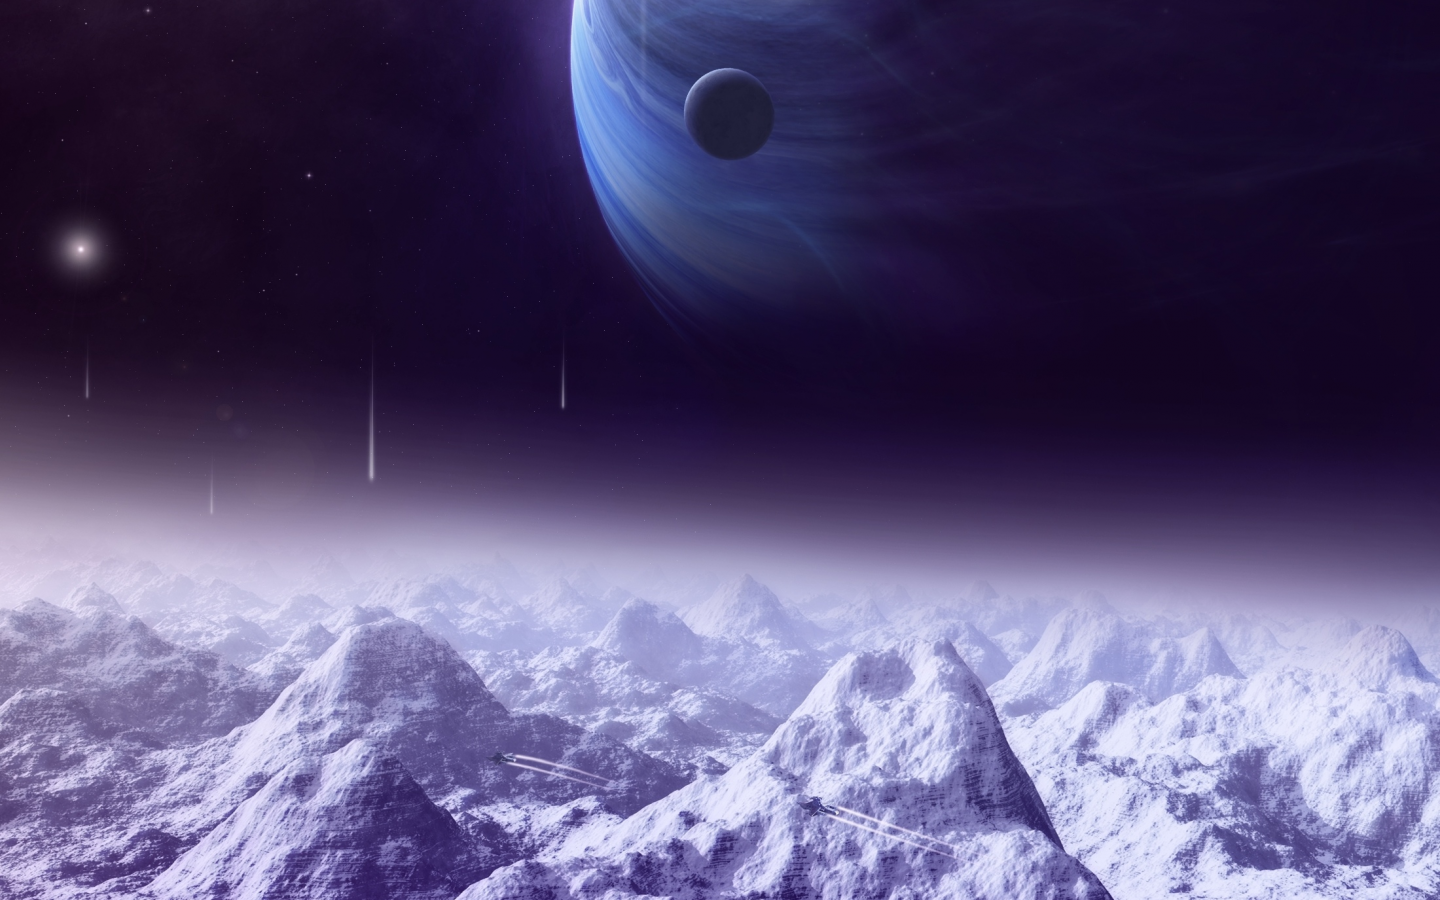 lights, satellite, planets, space ships, sci fi, moon, mountains